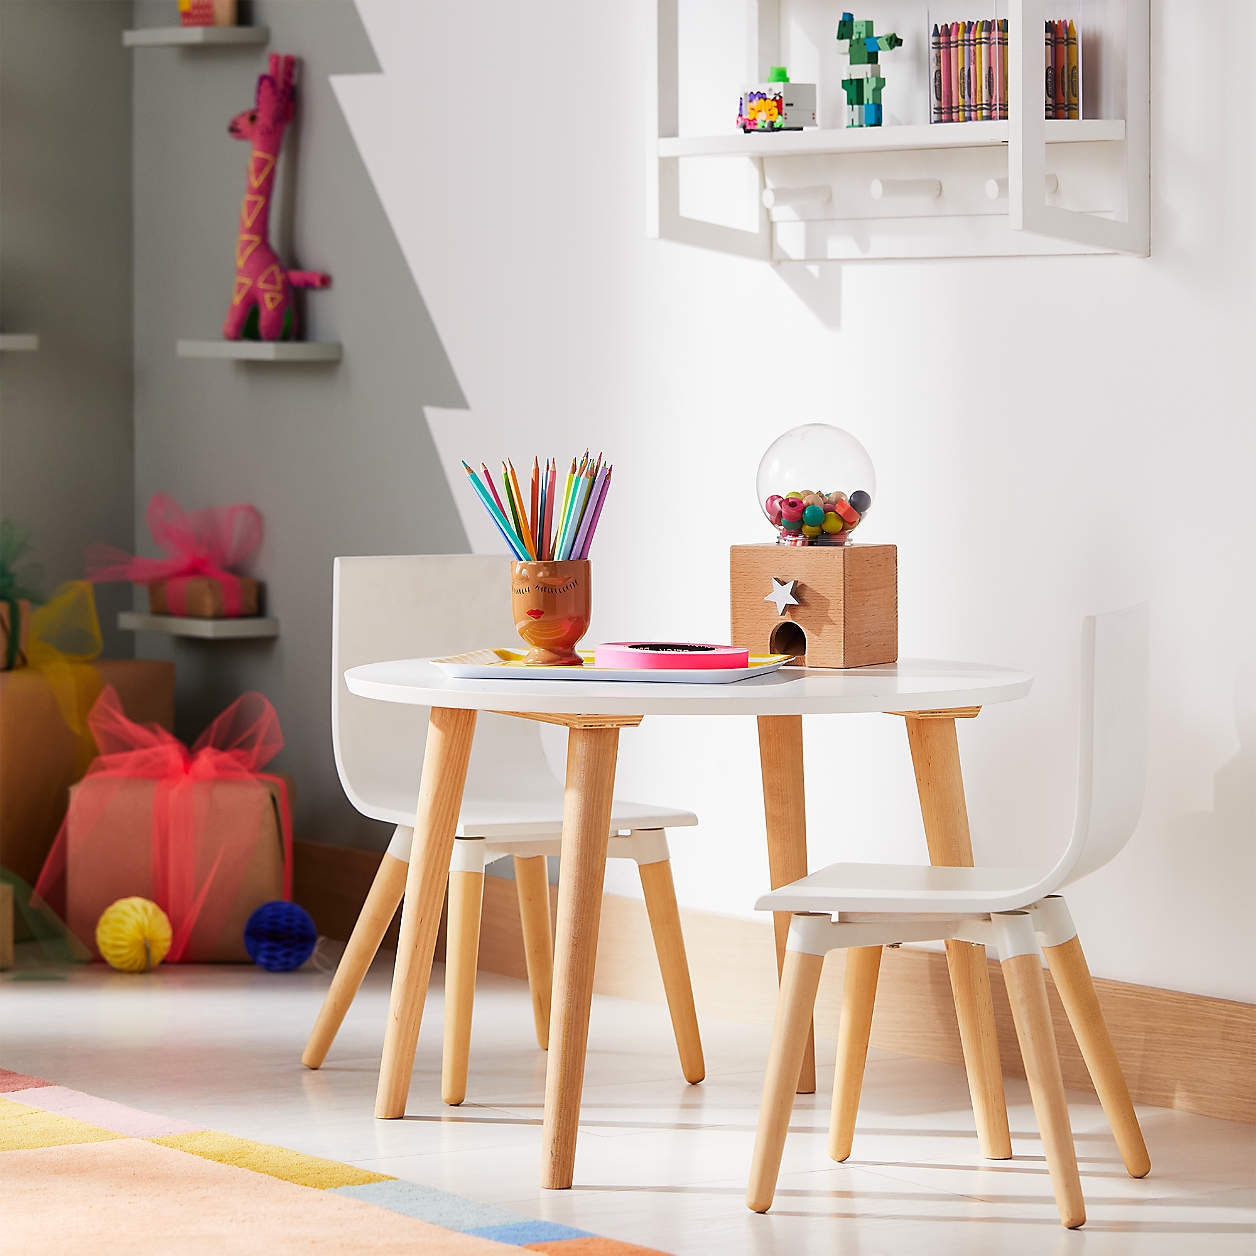 Pint Sized Toddler Table & Chair Set, White - Image 4